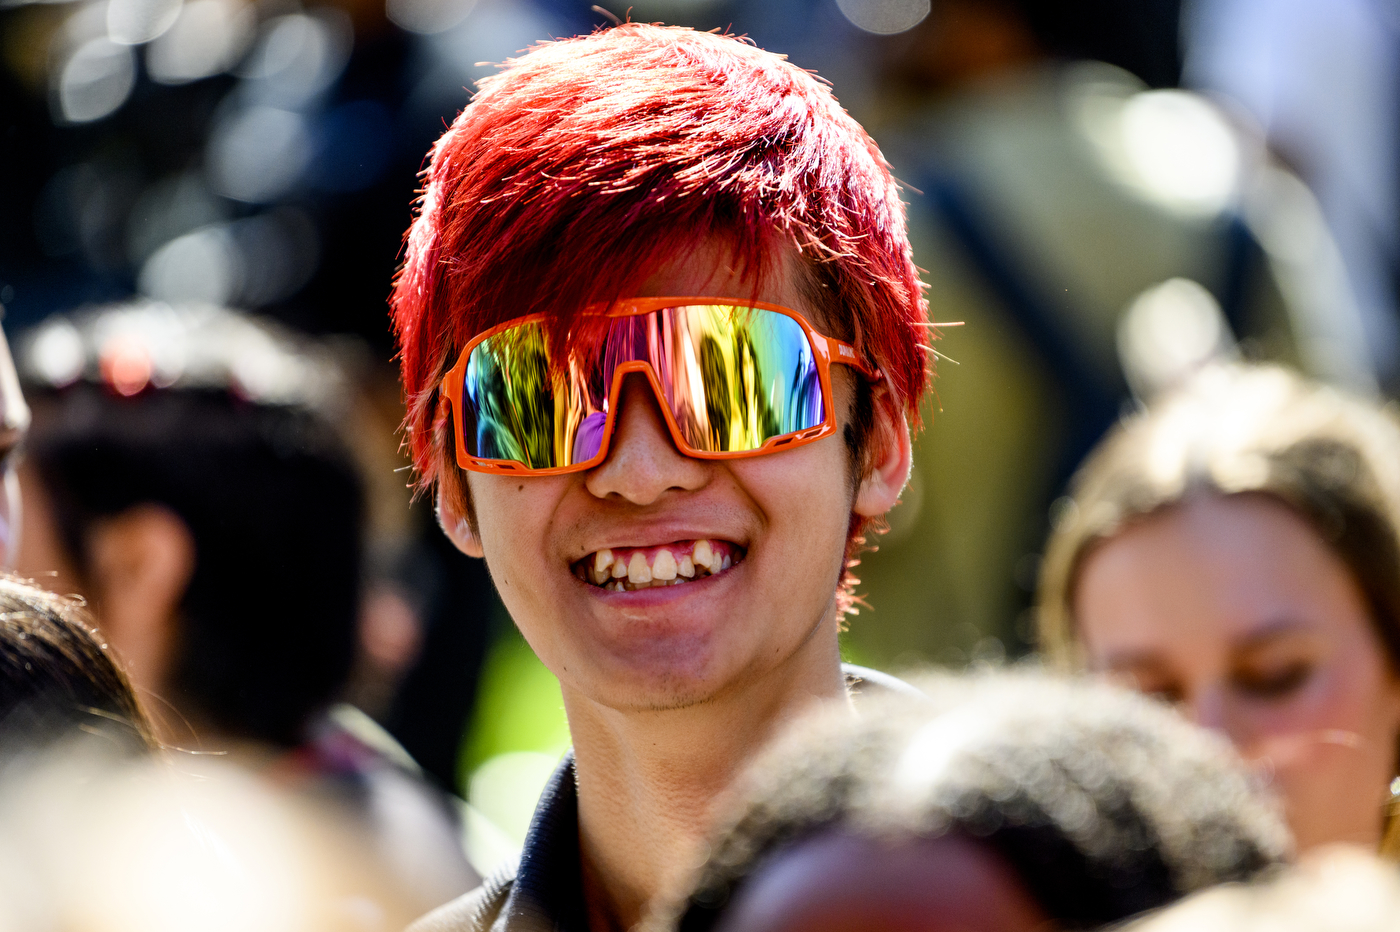 Northeastern student with red hair and red sunglasses posing for a photo.